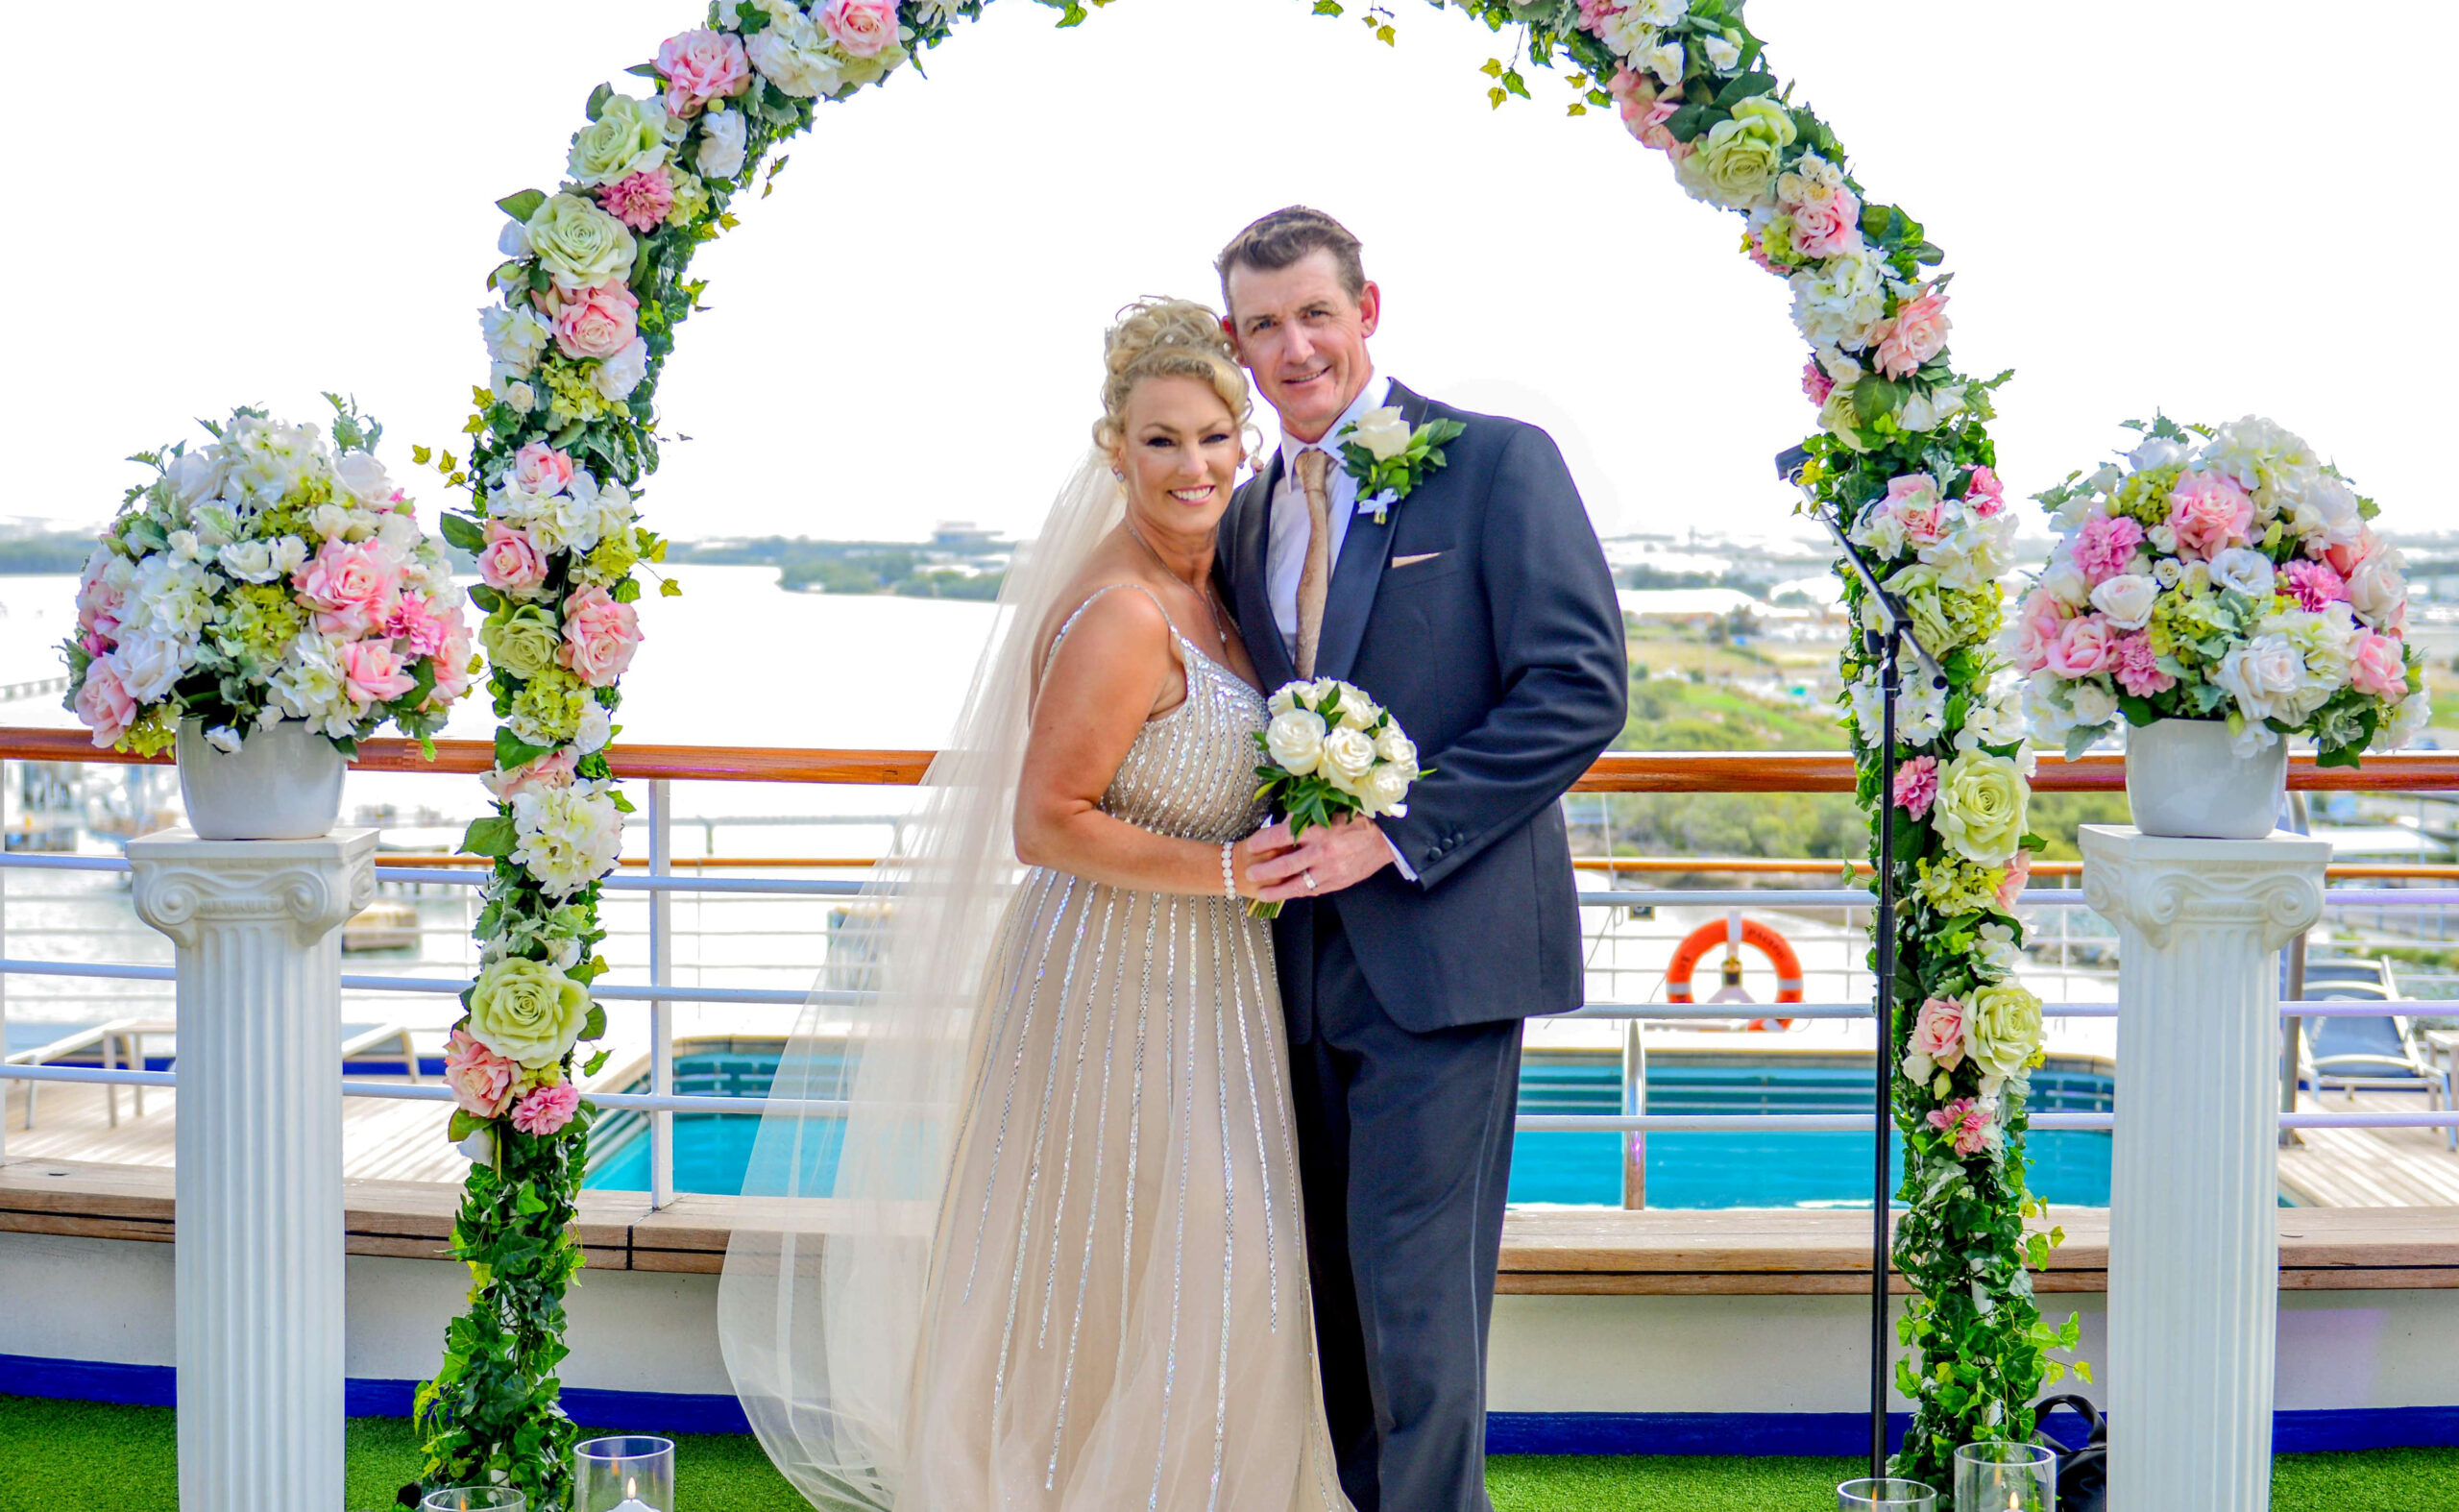 REAL LIFE: All aboard the love boat! How an ordinary cruise turned into ‘I do’